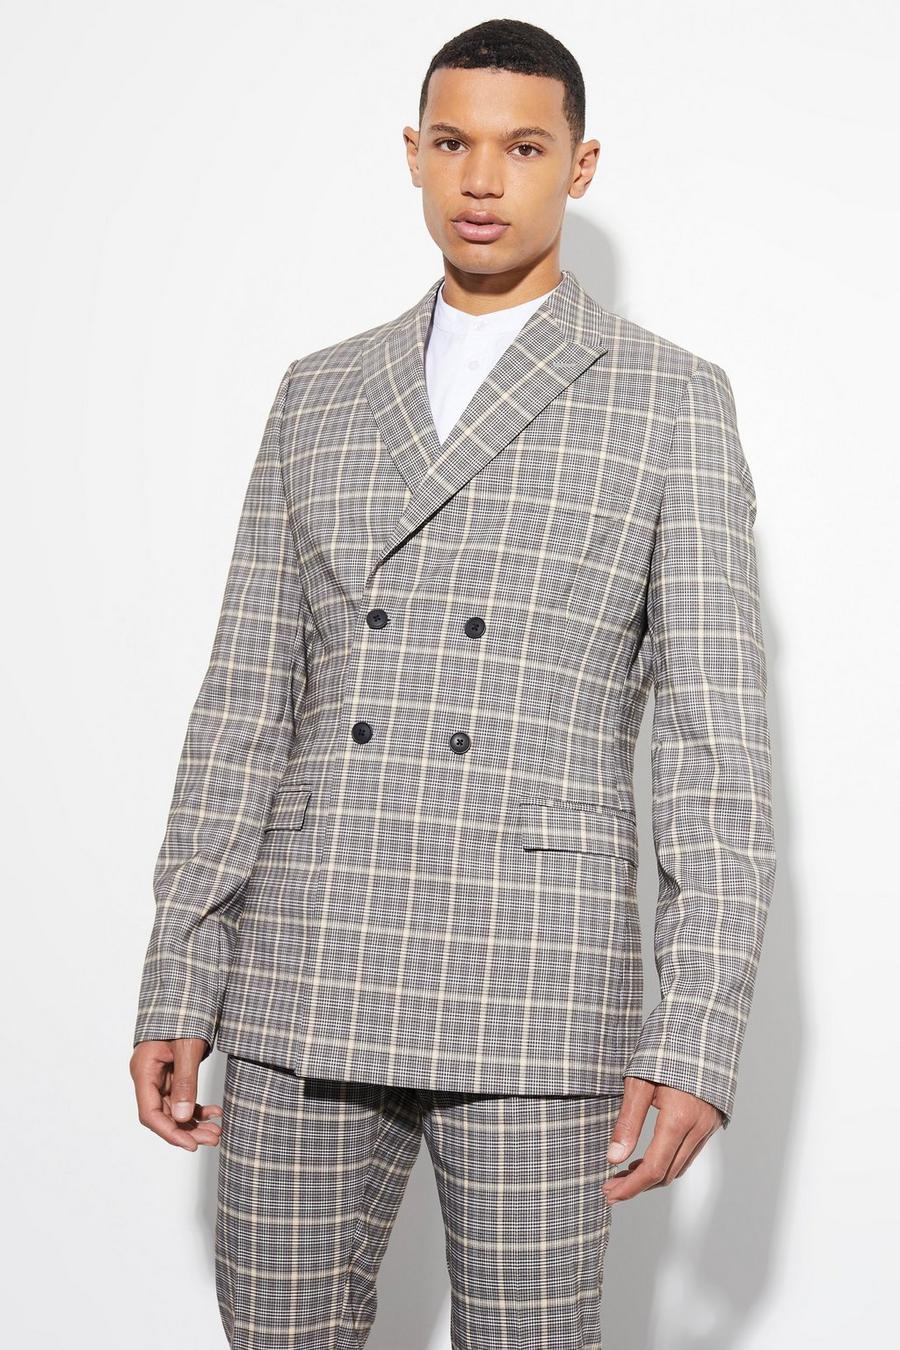 Black negro Tall Skinny Double Breasted Check Suit Jacket